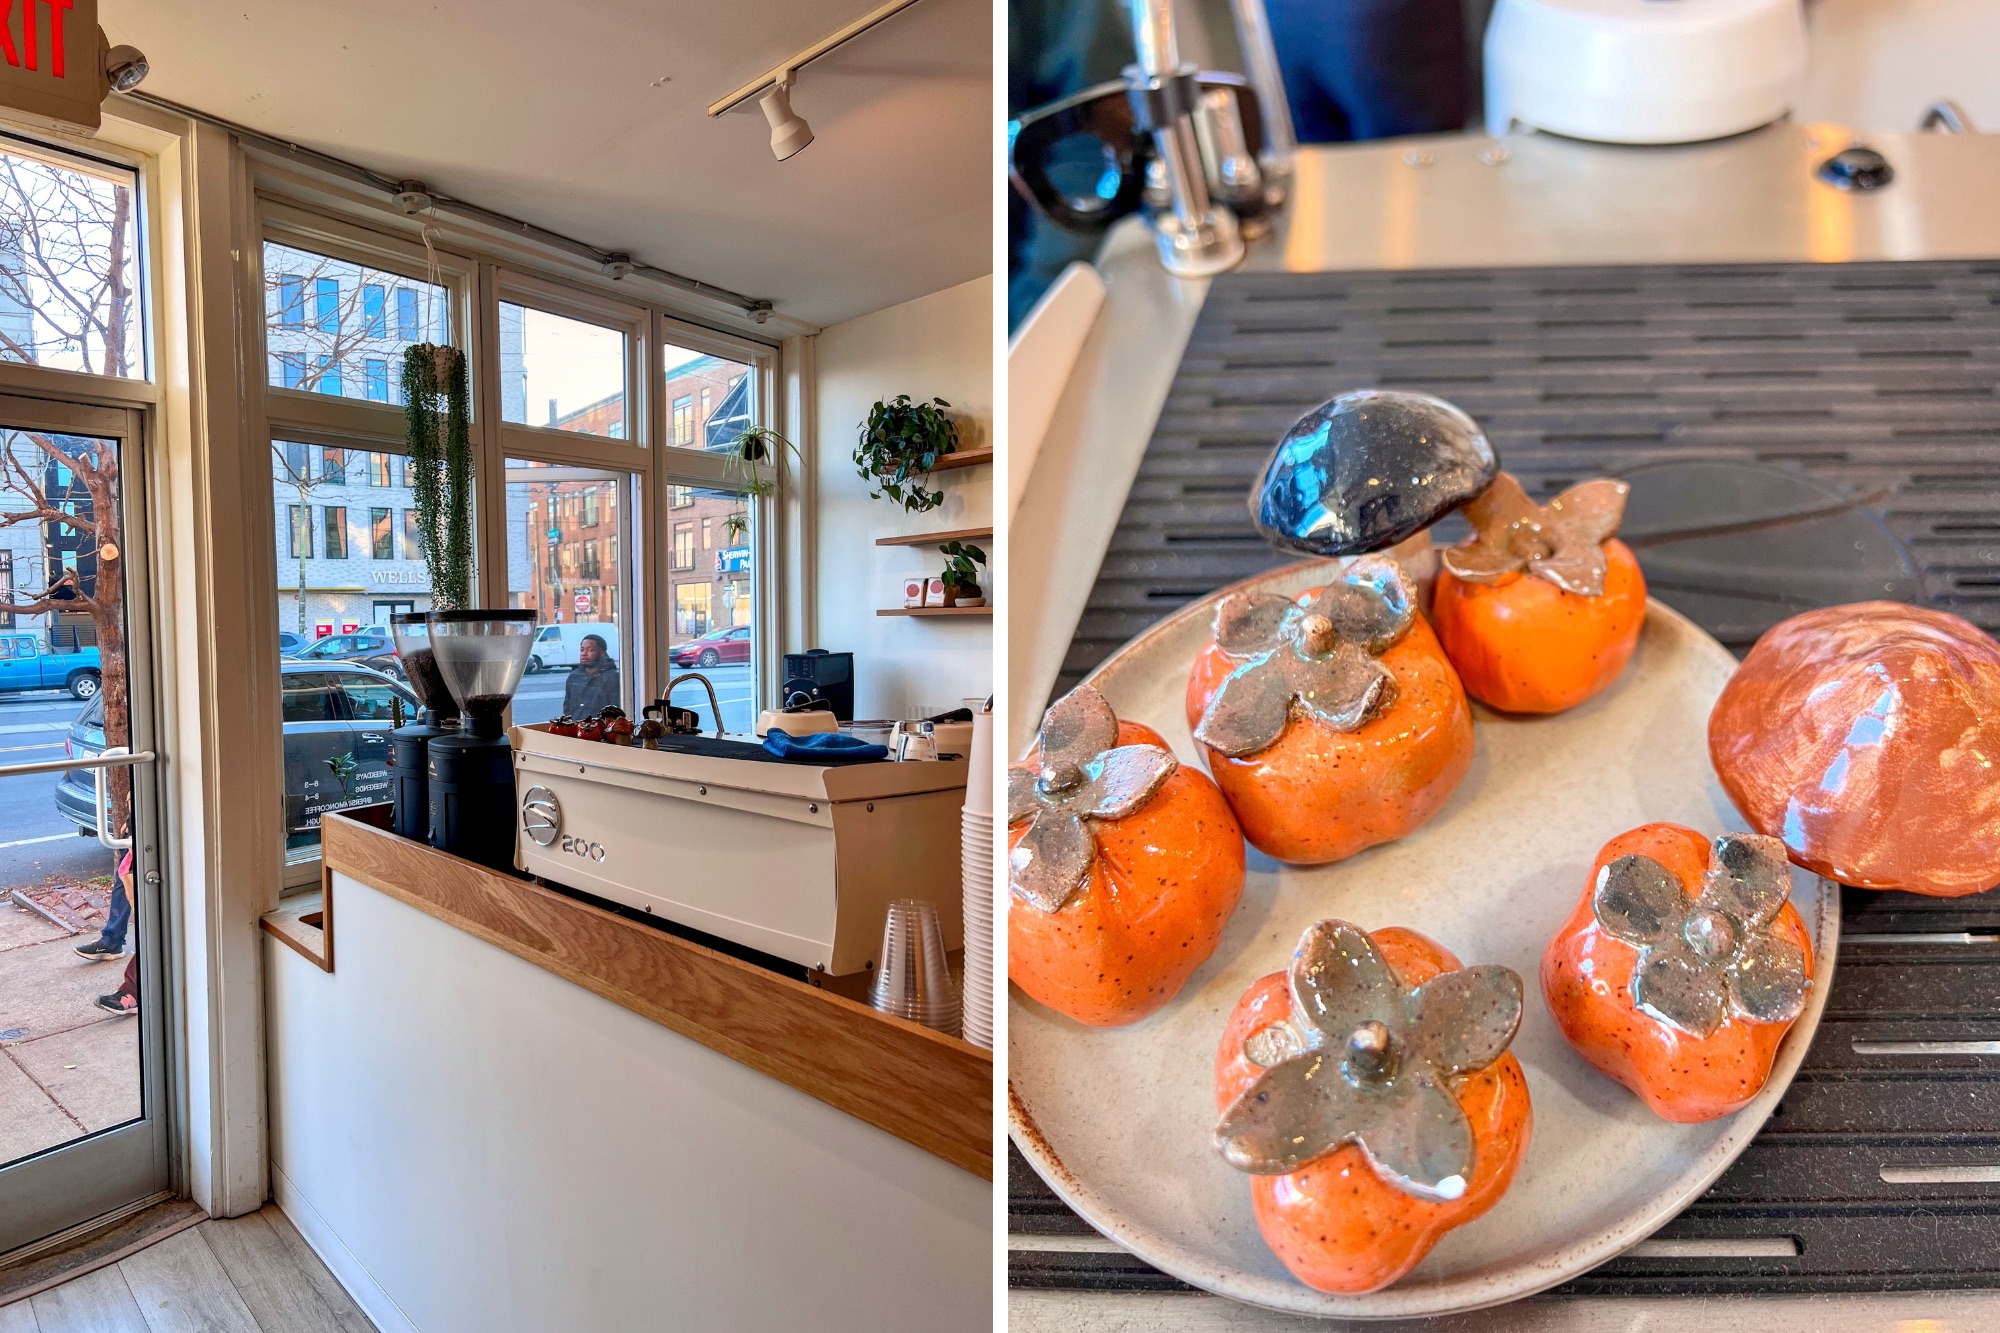 Interior of Persimmon Coffee and a tray of ceramic persimmons